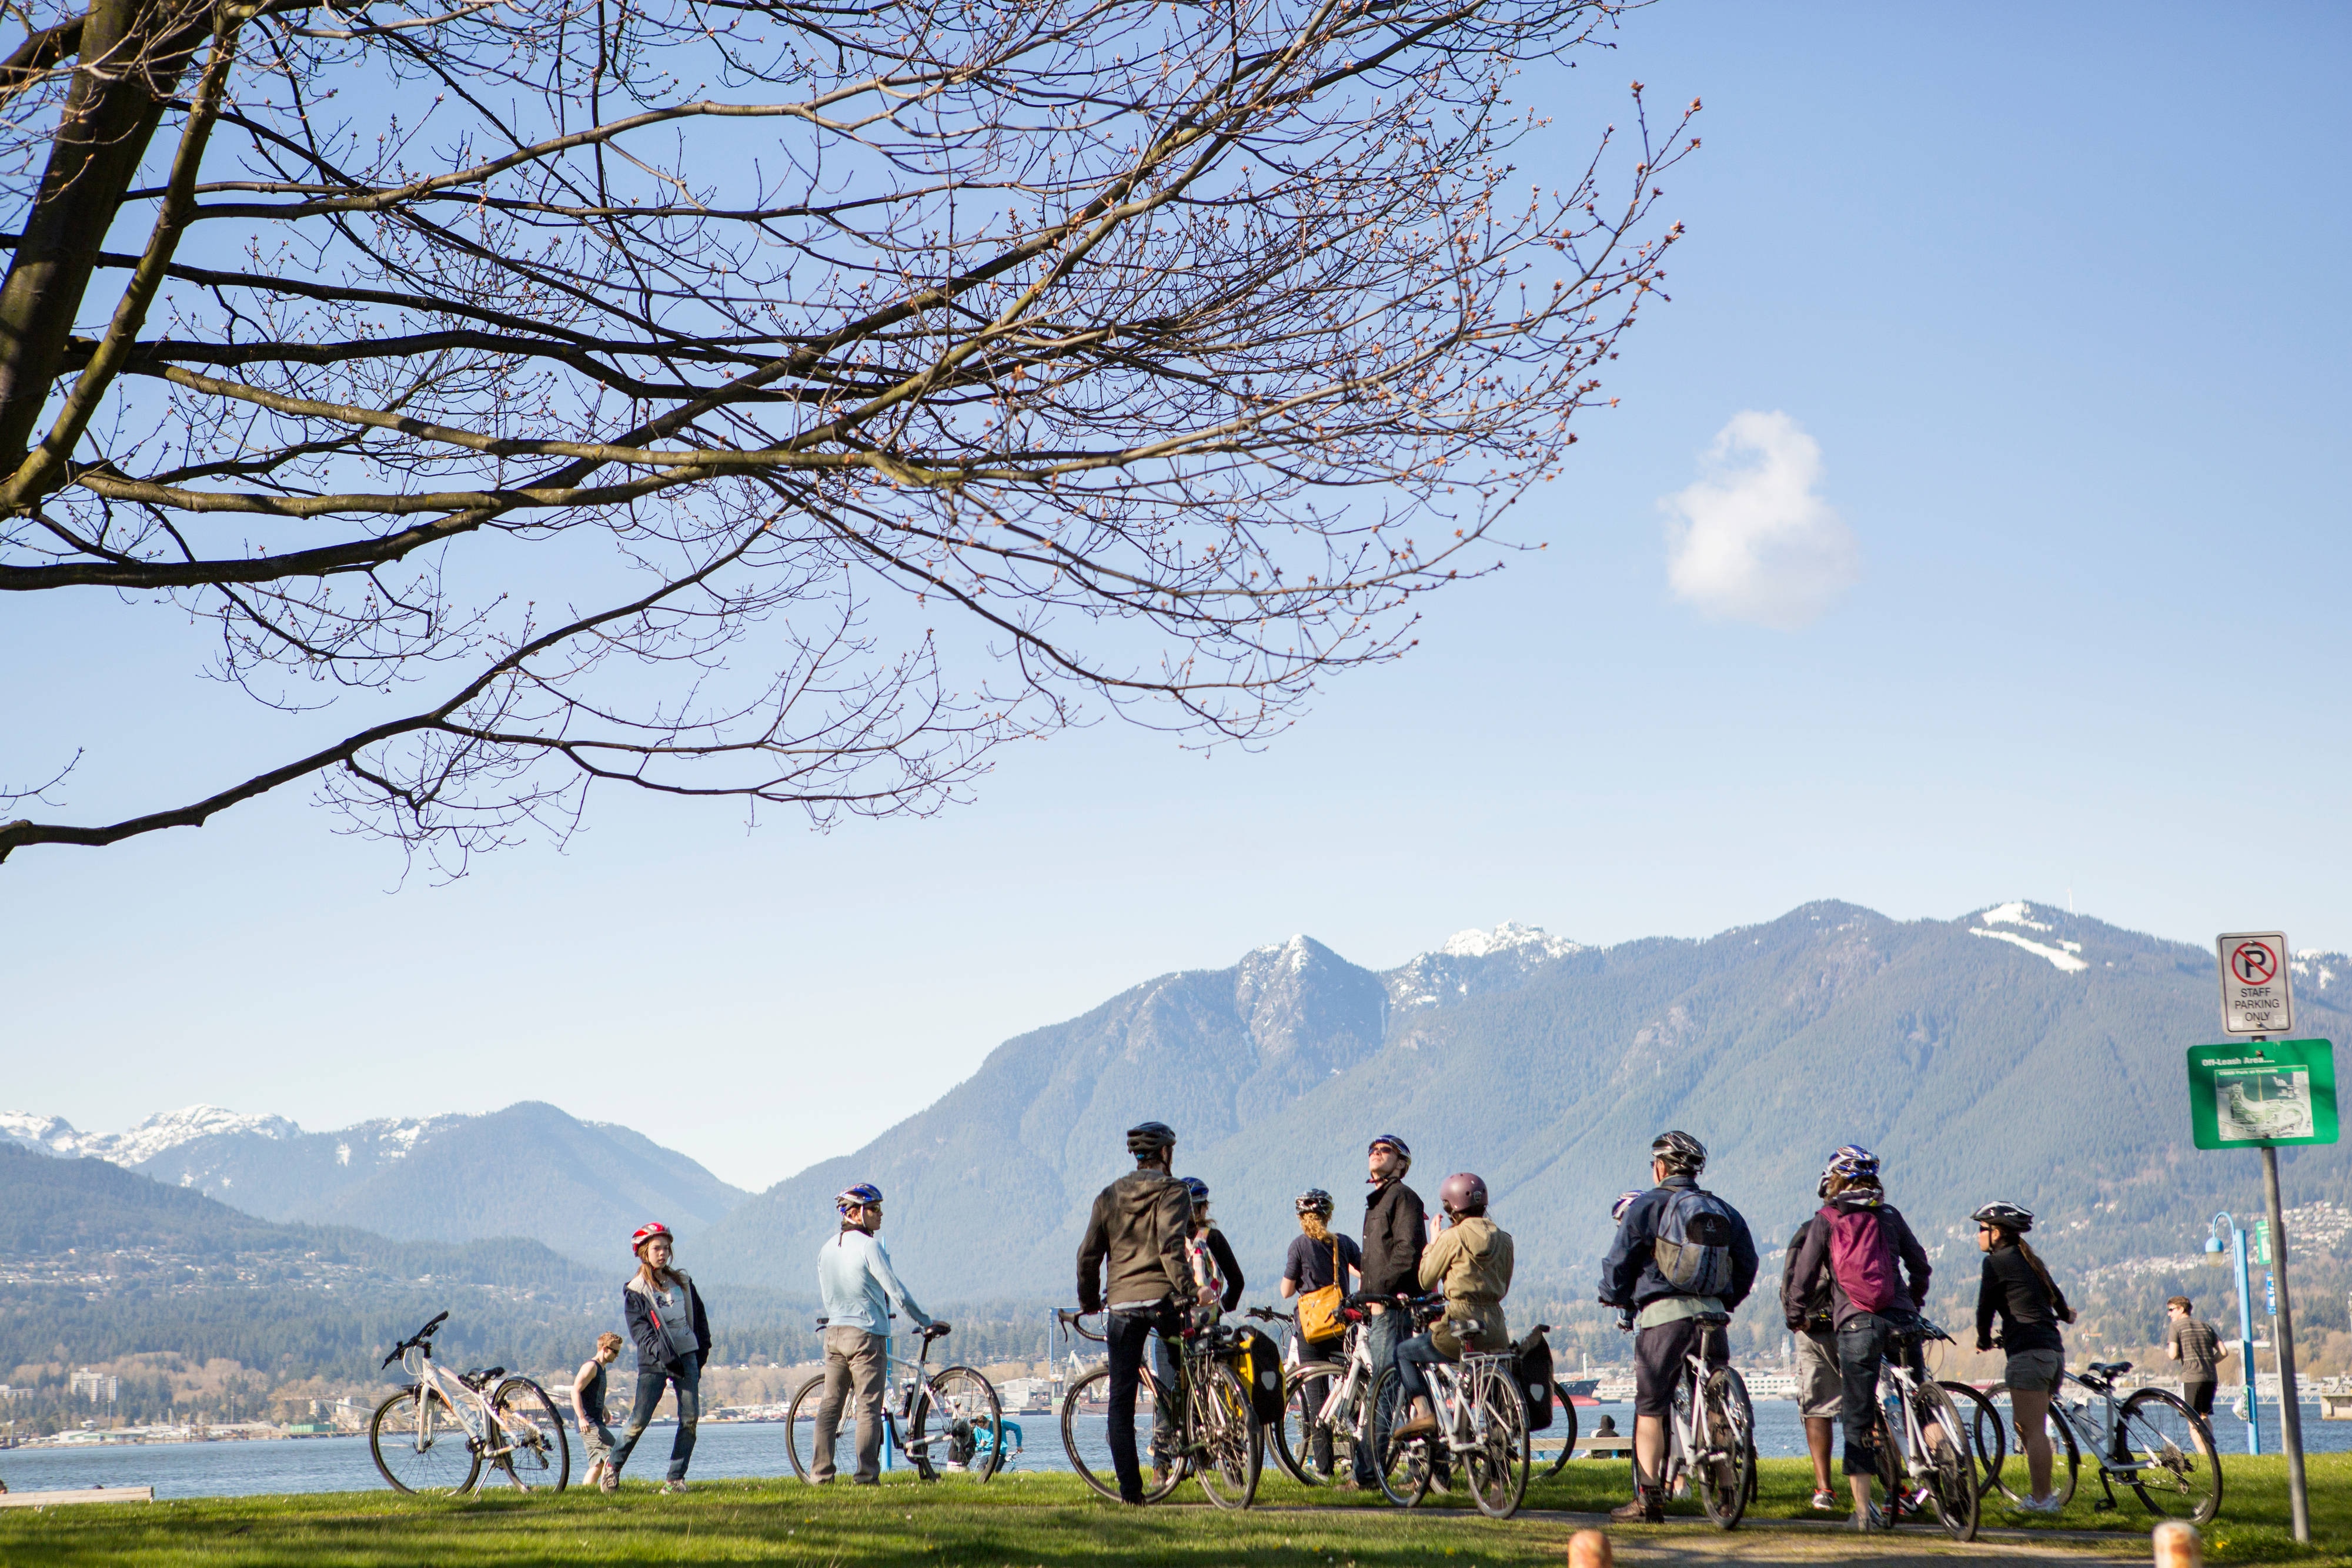 People bicycling outdoors beside the water and snowy mountains.